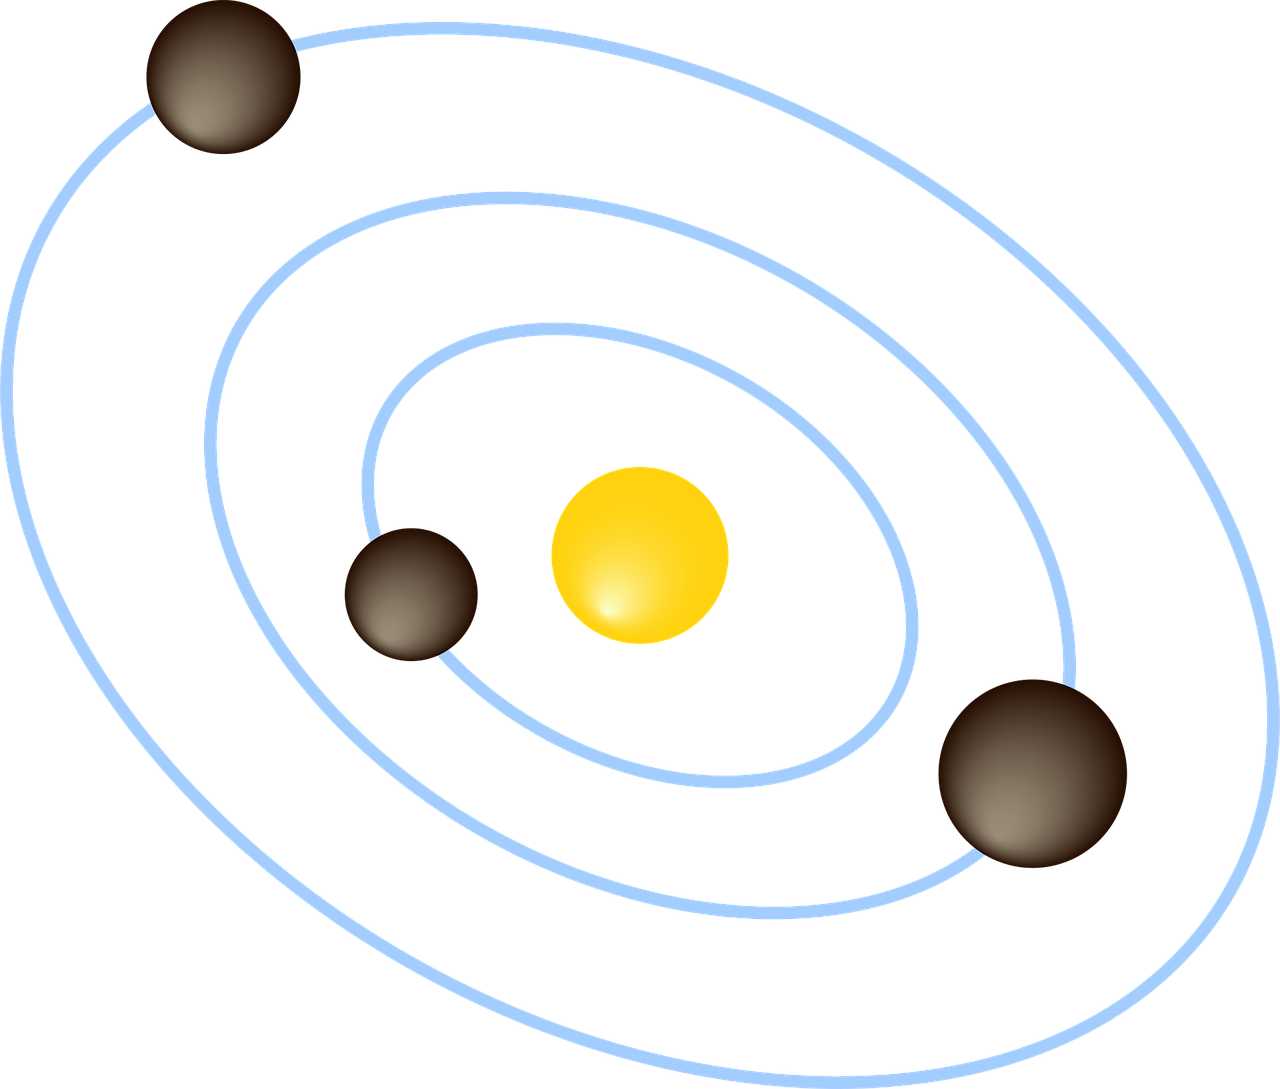 solar system small planets free photo